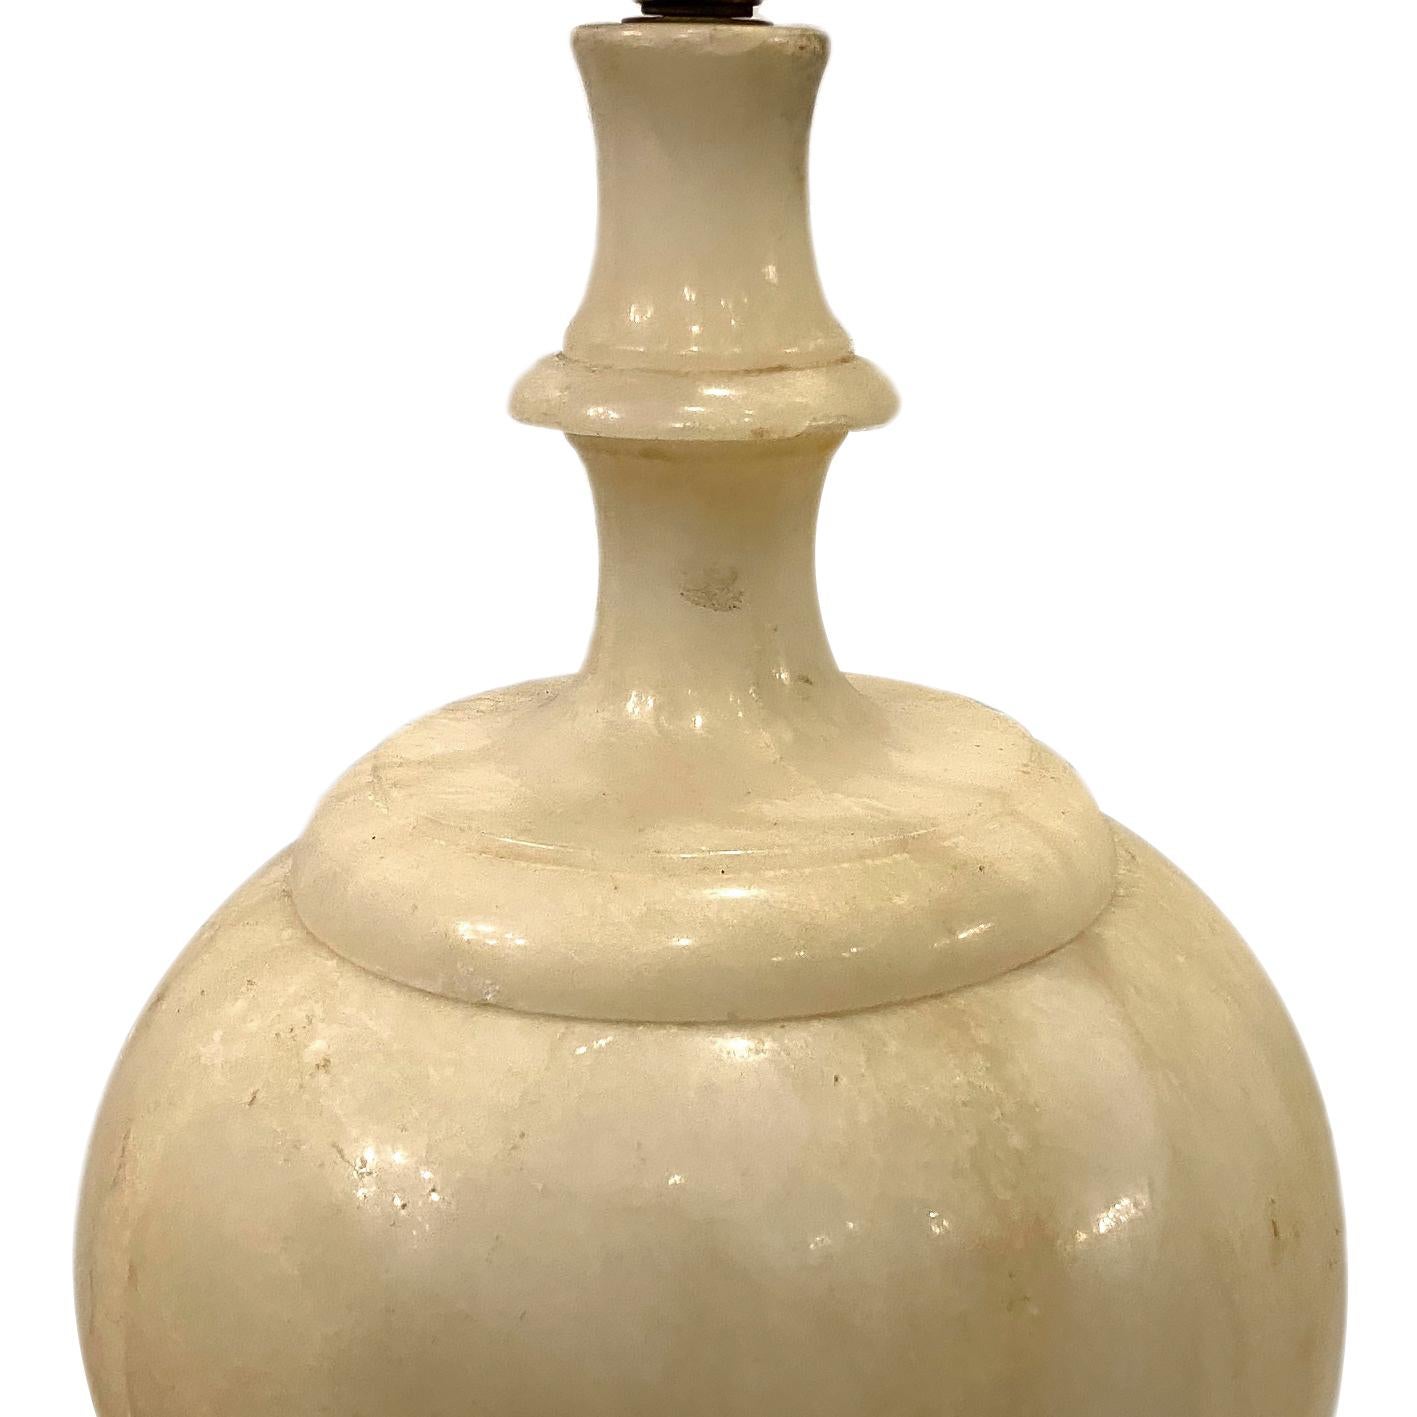 Single circa 1920s Italian alabaster table lamp with interior and exterior lights.

Measurements:
Height of body 23